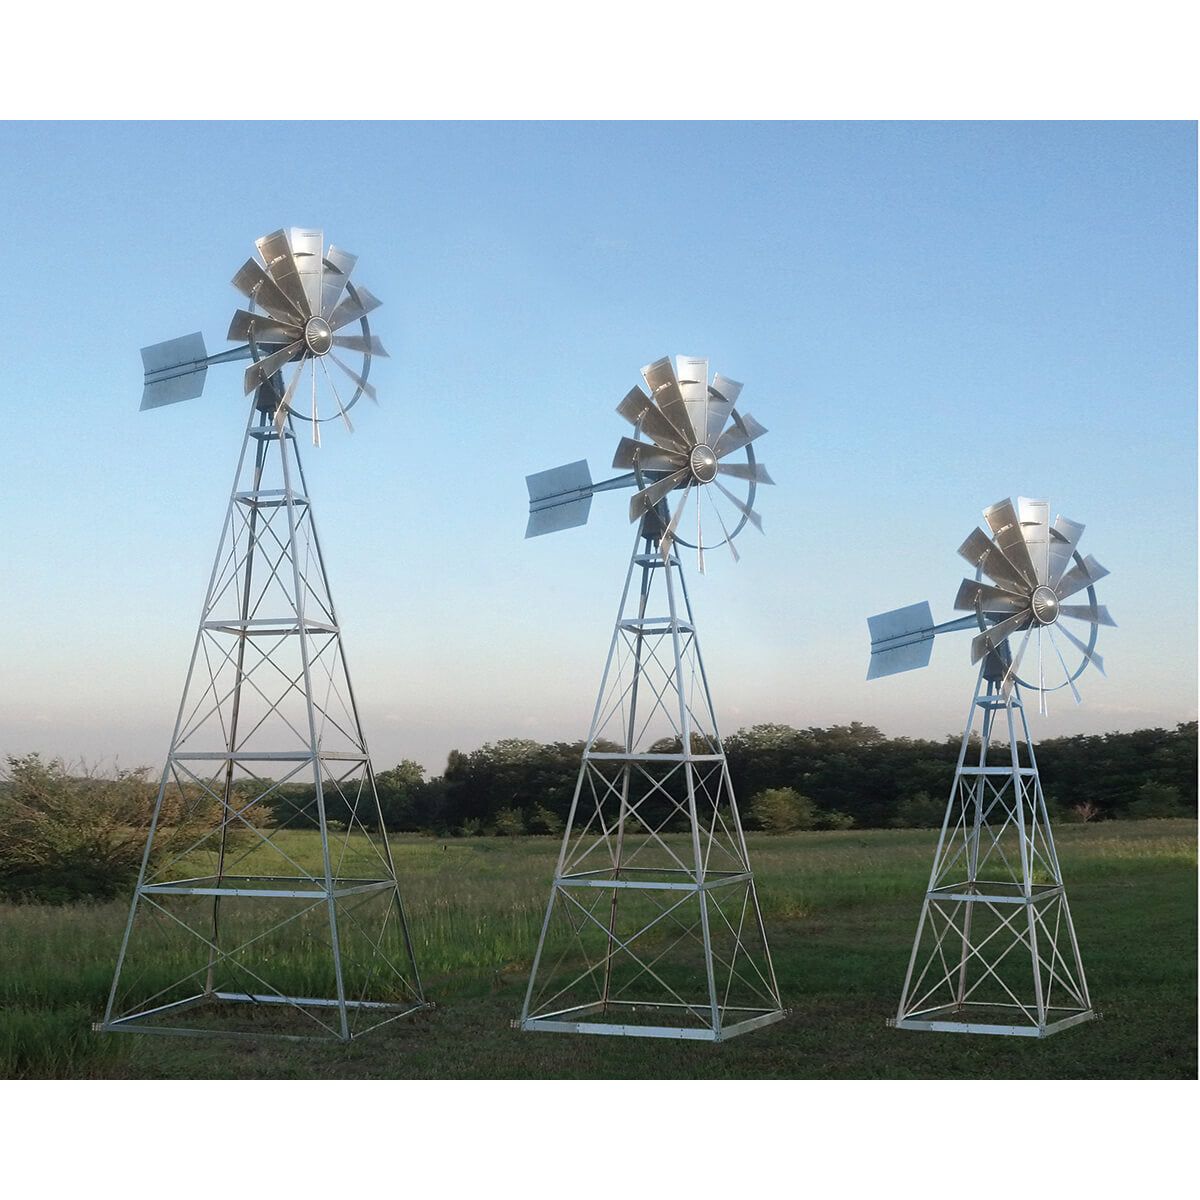 Becker Windmills 20′ Four Legged Windmill Assembly with Quick Sink Tubing - American Pond Supplies Becker Windmills Windmill Windmill